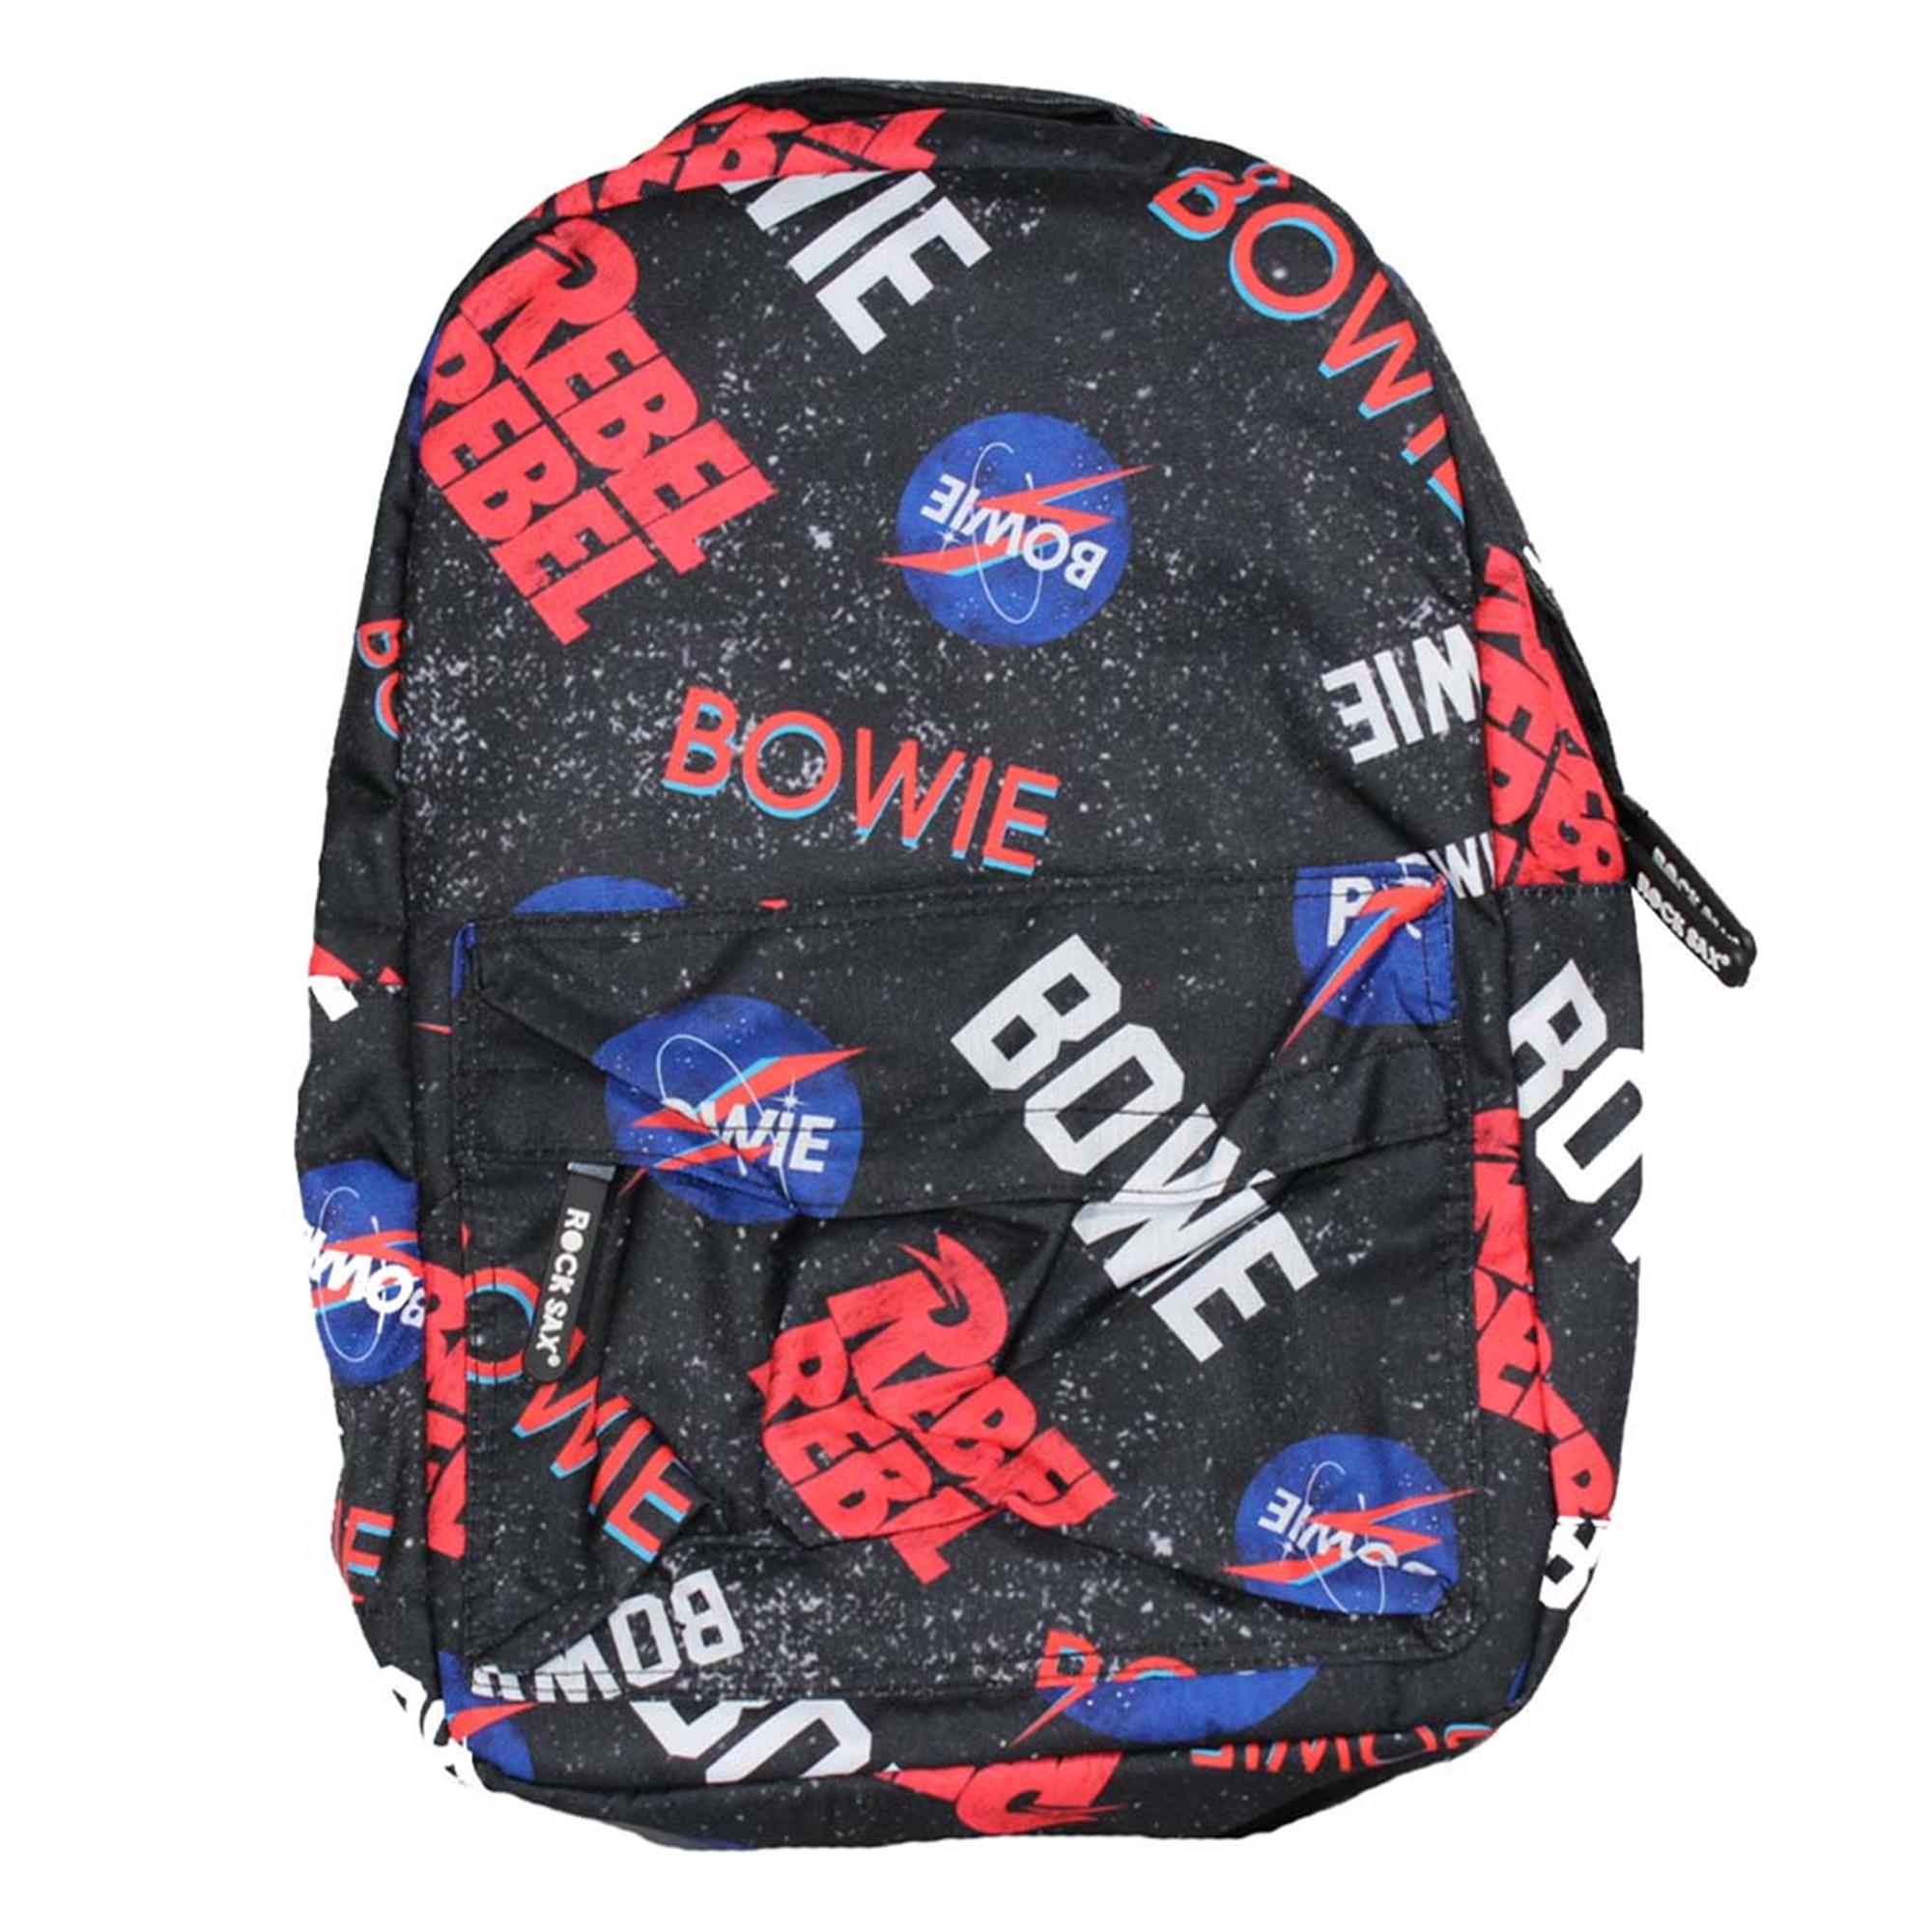 David Bowie Astro Classic Backpack